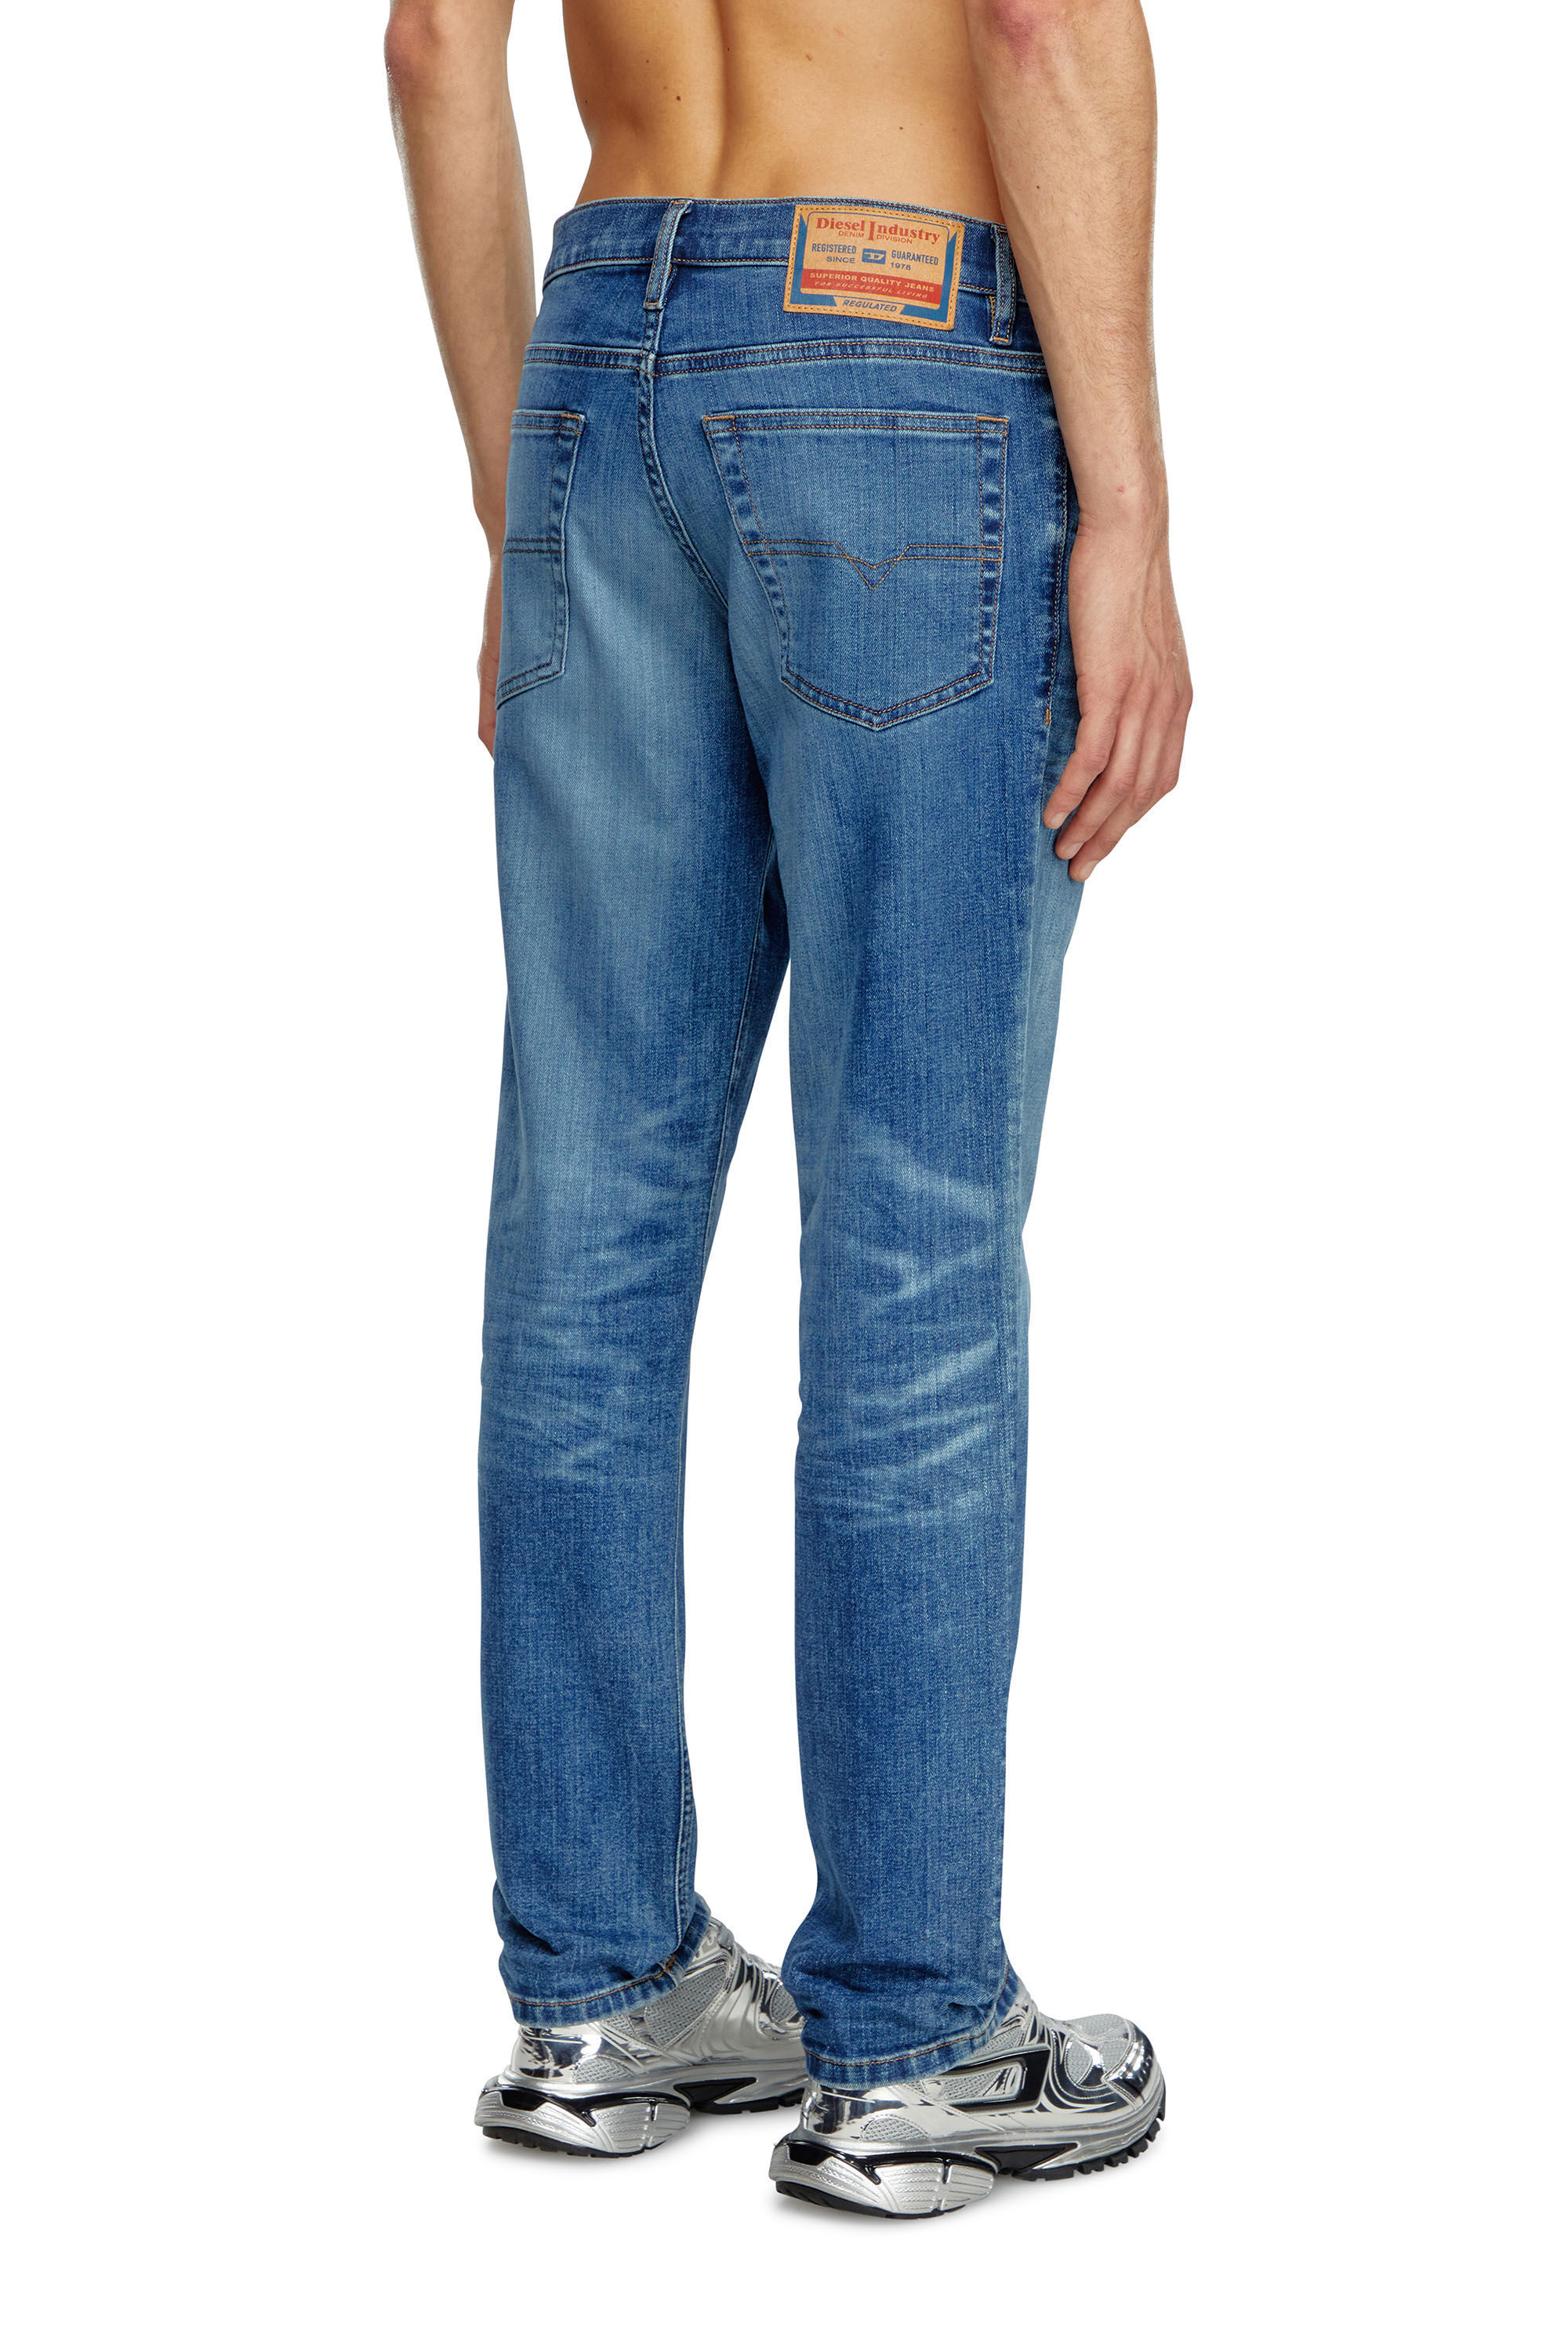 Diesel - Tapered Jeans 2023 D-Finitive 0GRDP, Hombre Tapered Jeans - 2023 D-Finitive in Azul marino - Image 4